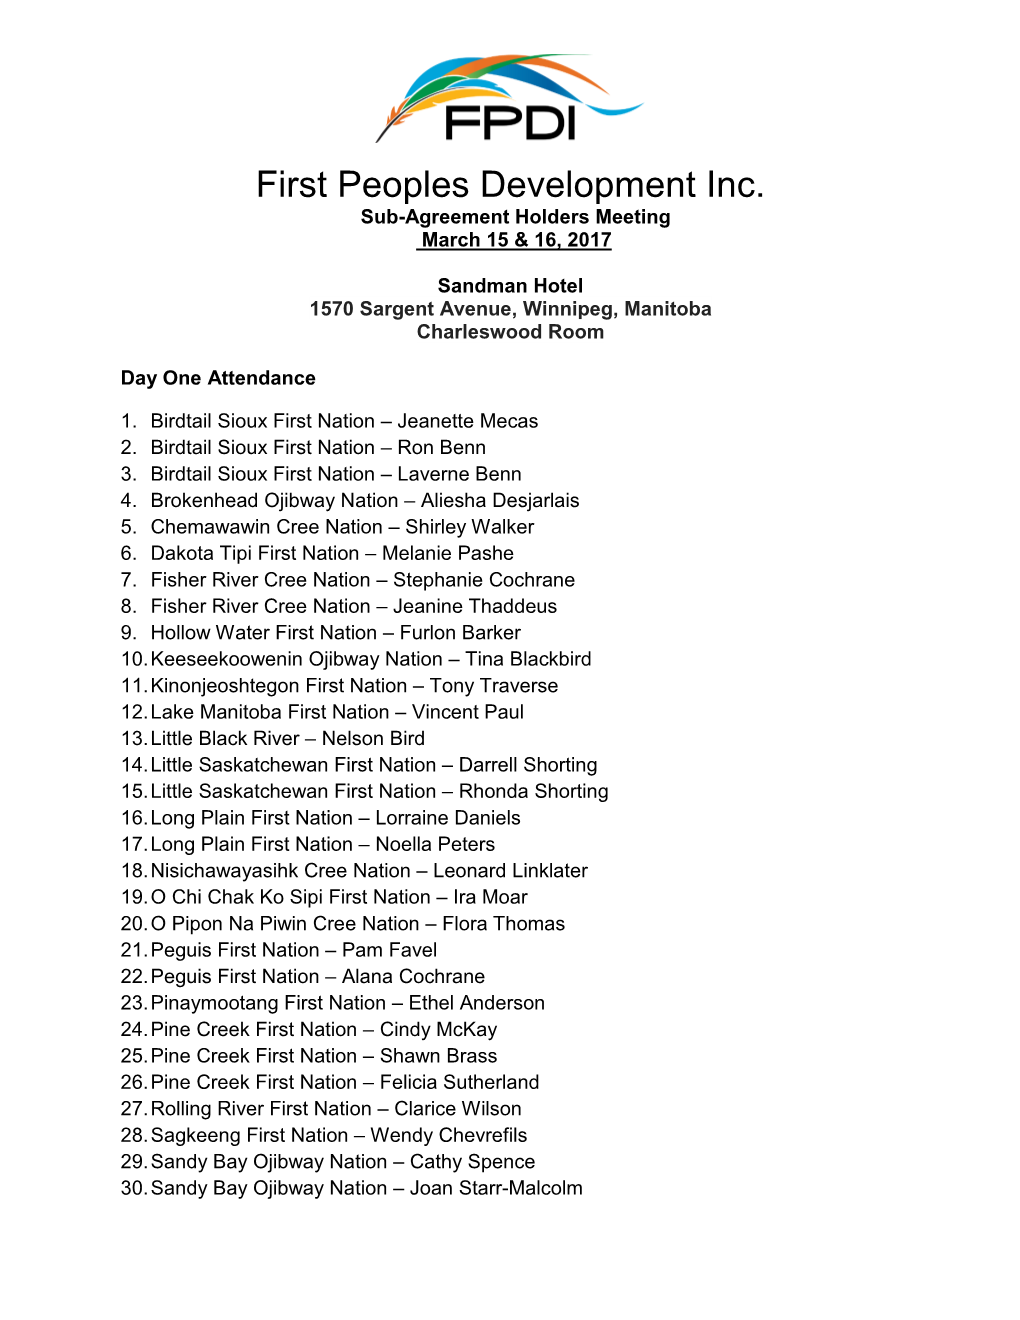 First Peoples Development Inc. Sub-Agreement Holders Meeting March 15 & 16, 2017